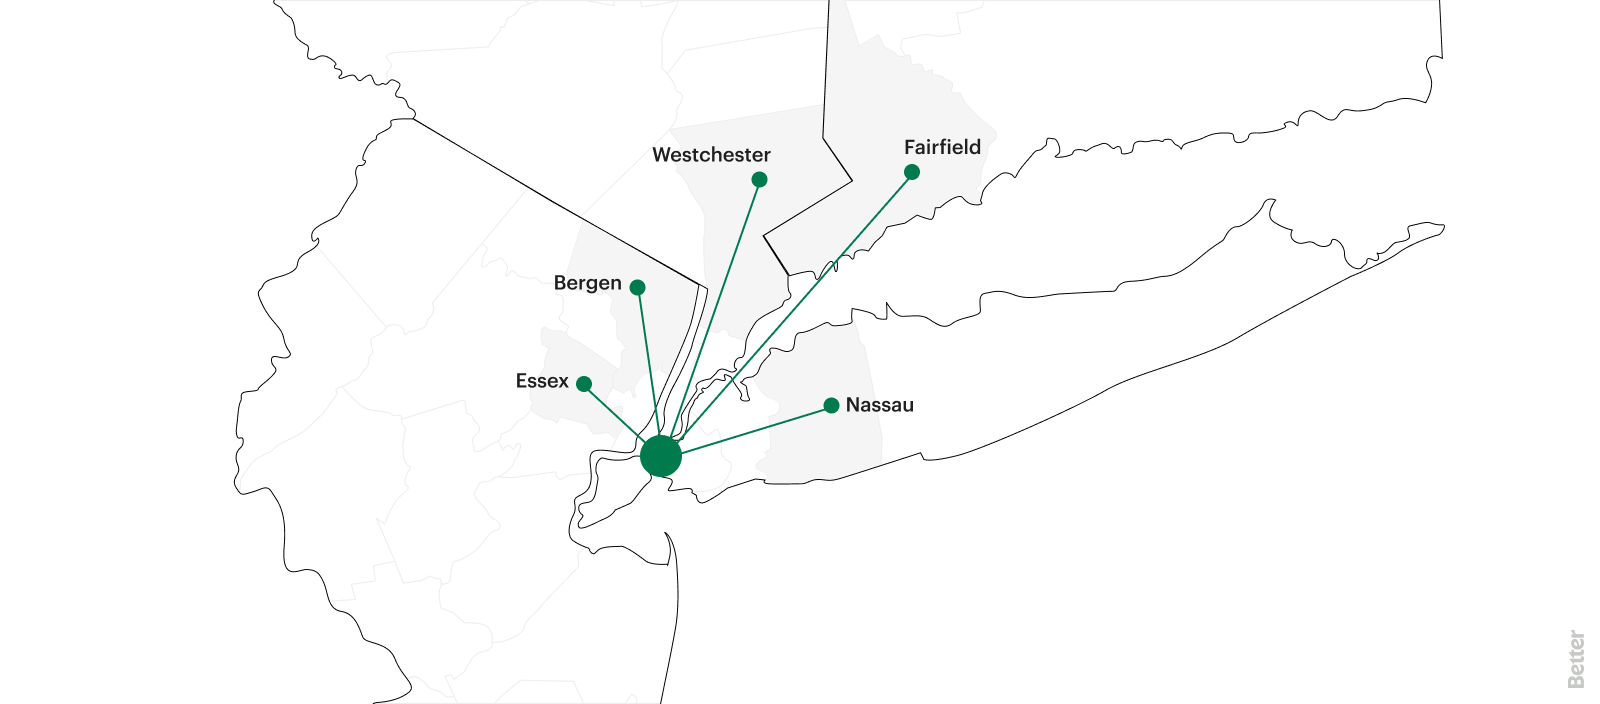 Map of New York City With Arrows Pointing to Essex, Bergen, Westchester, Fairfield, Nassau